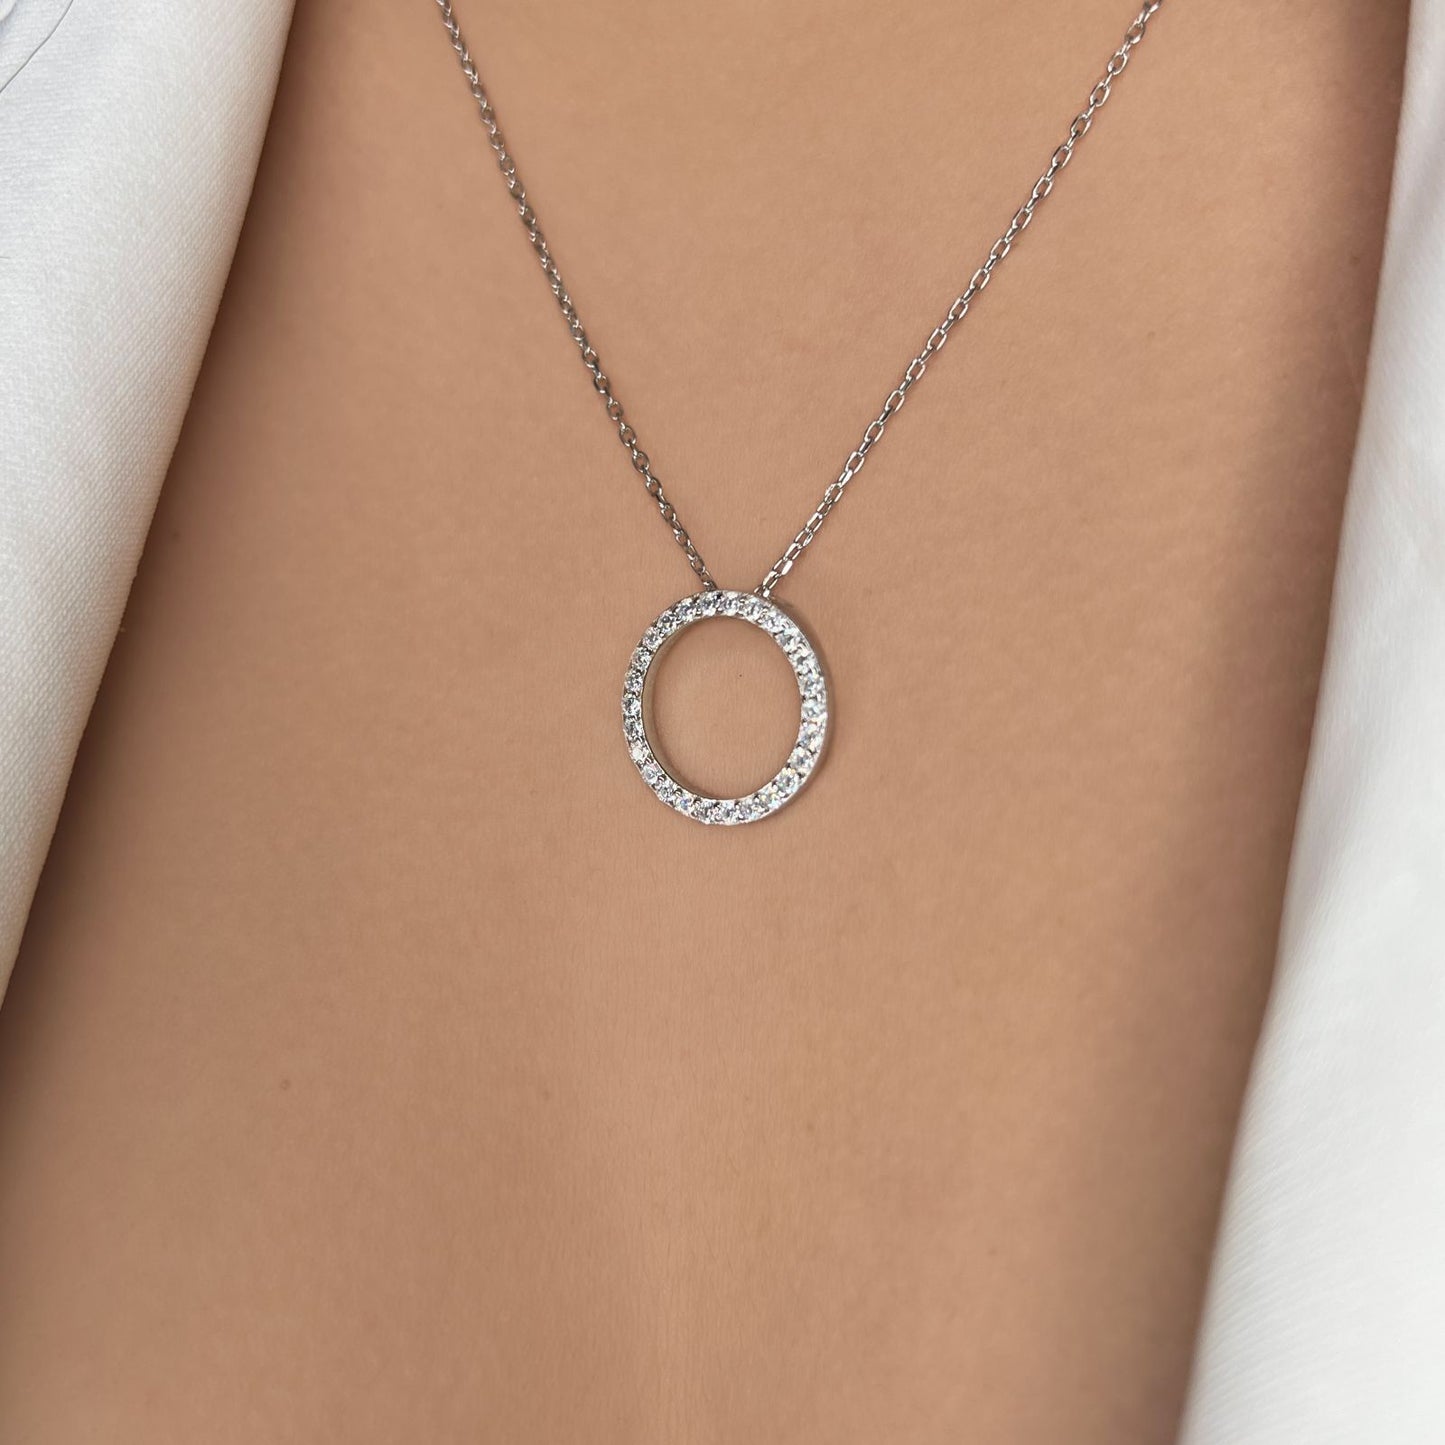 Bling Circle Necklace